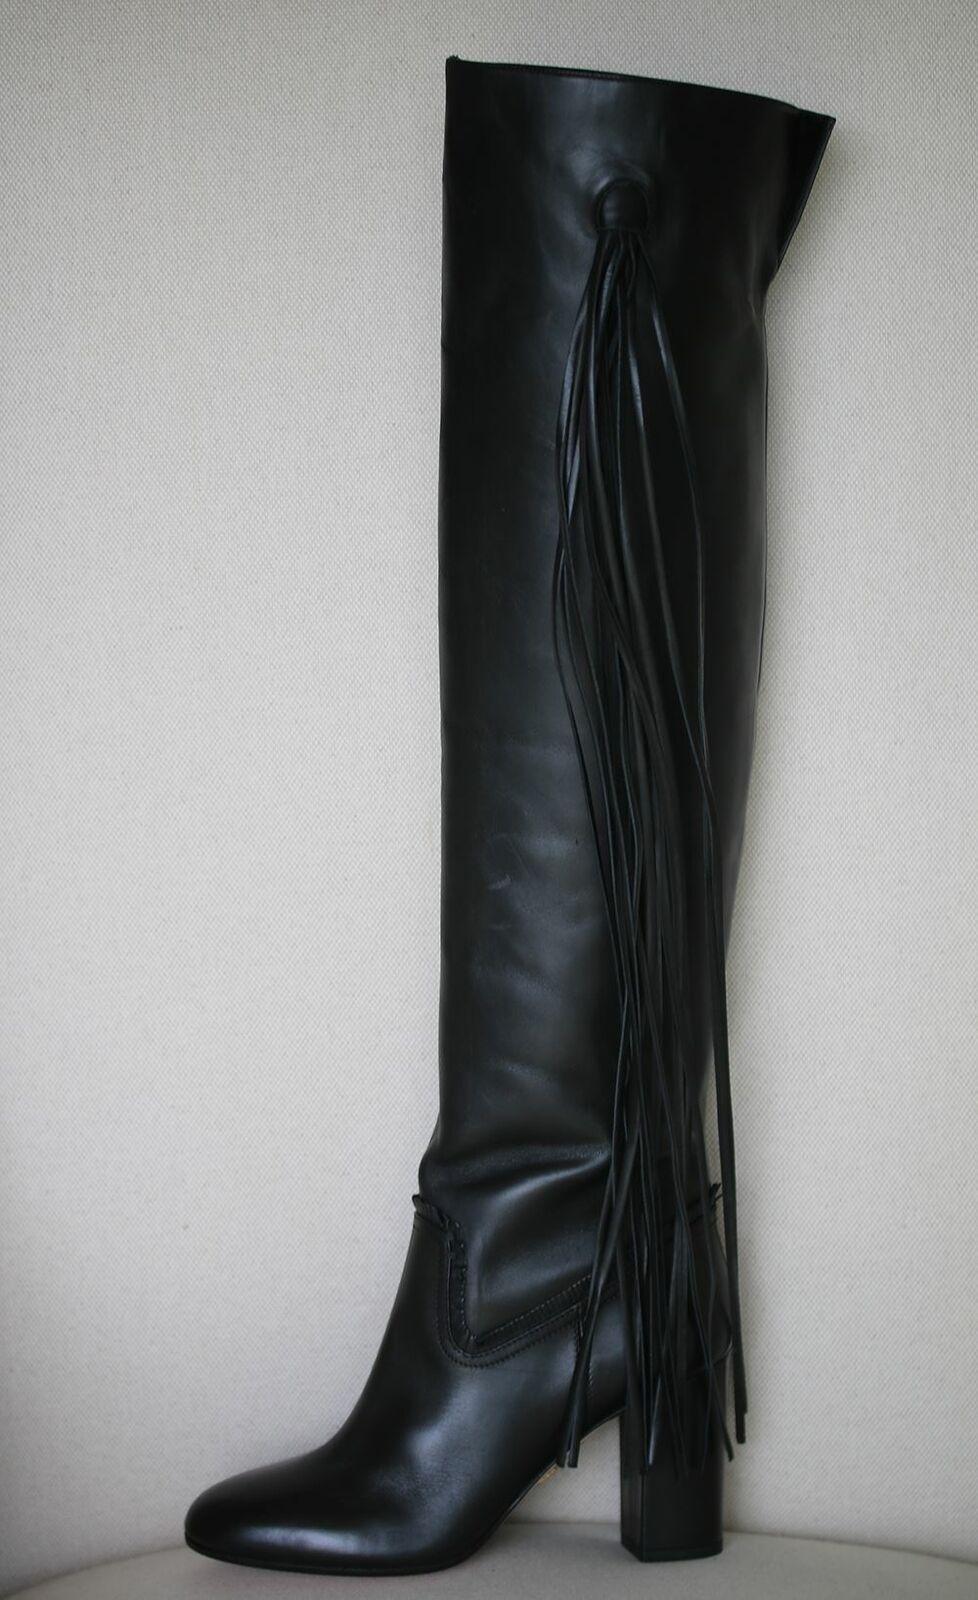 Black Aquazurra Whip It Leather Over-The-Knee Boots